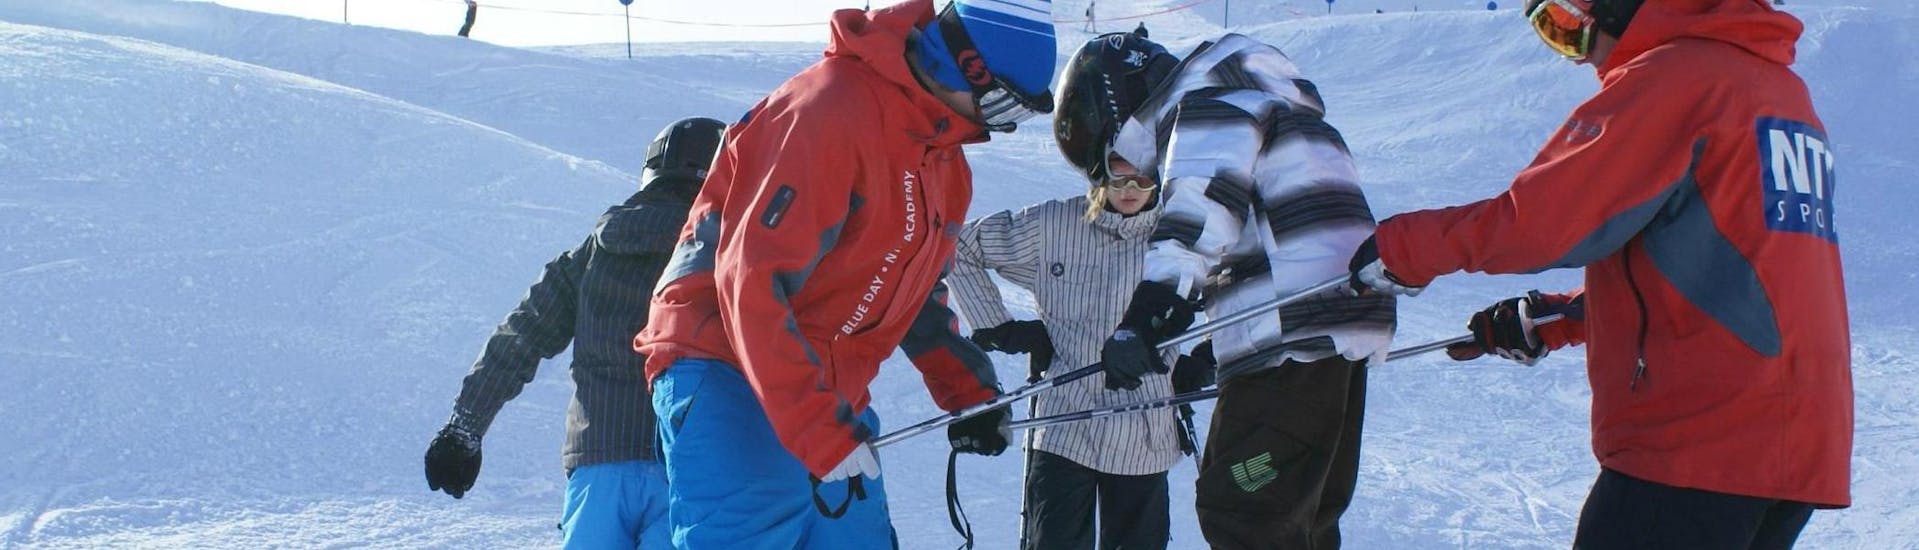 A child learns in the Kids Ski Lessons "NTC Freestyle Camp" (9-16 years) the basics of freestyle skiing from two instructors from NTC Skischule Oberstdorf.